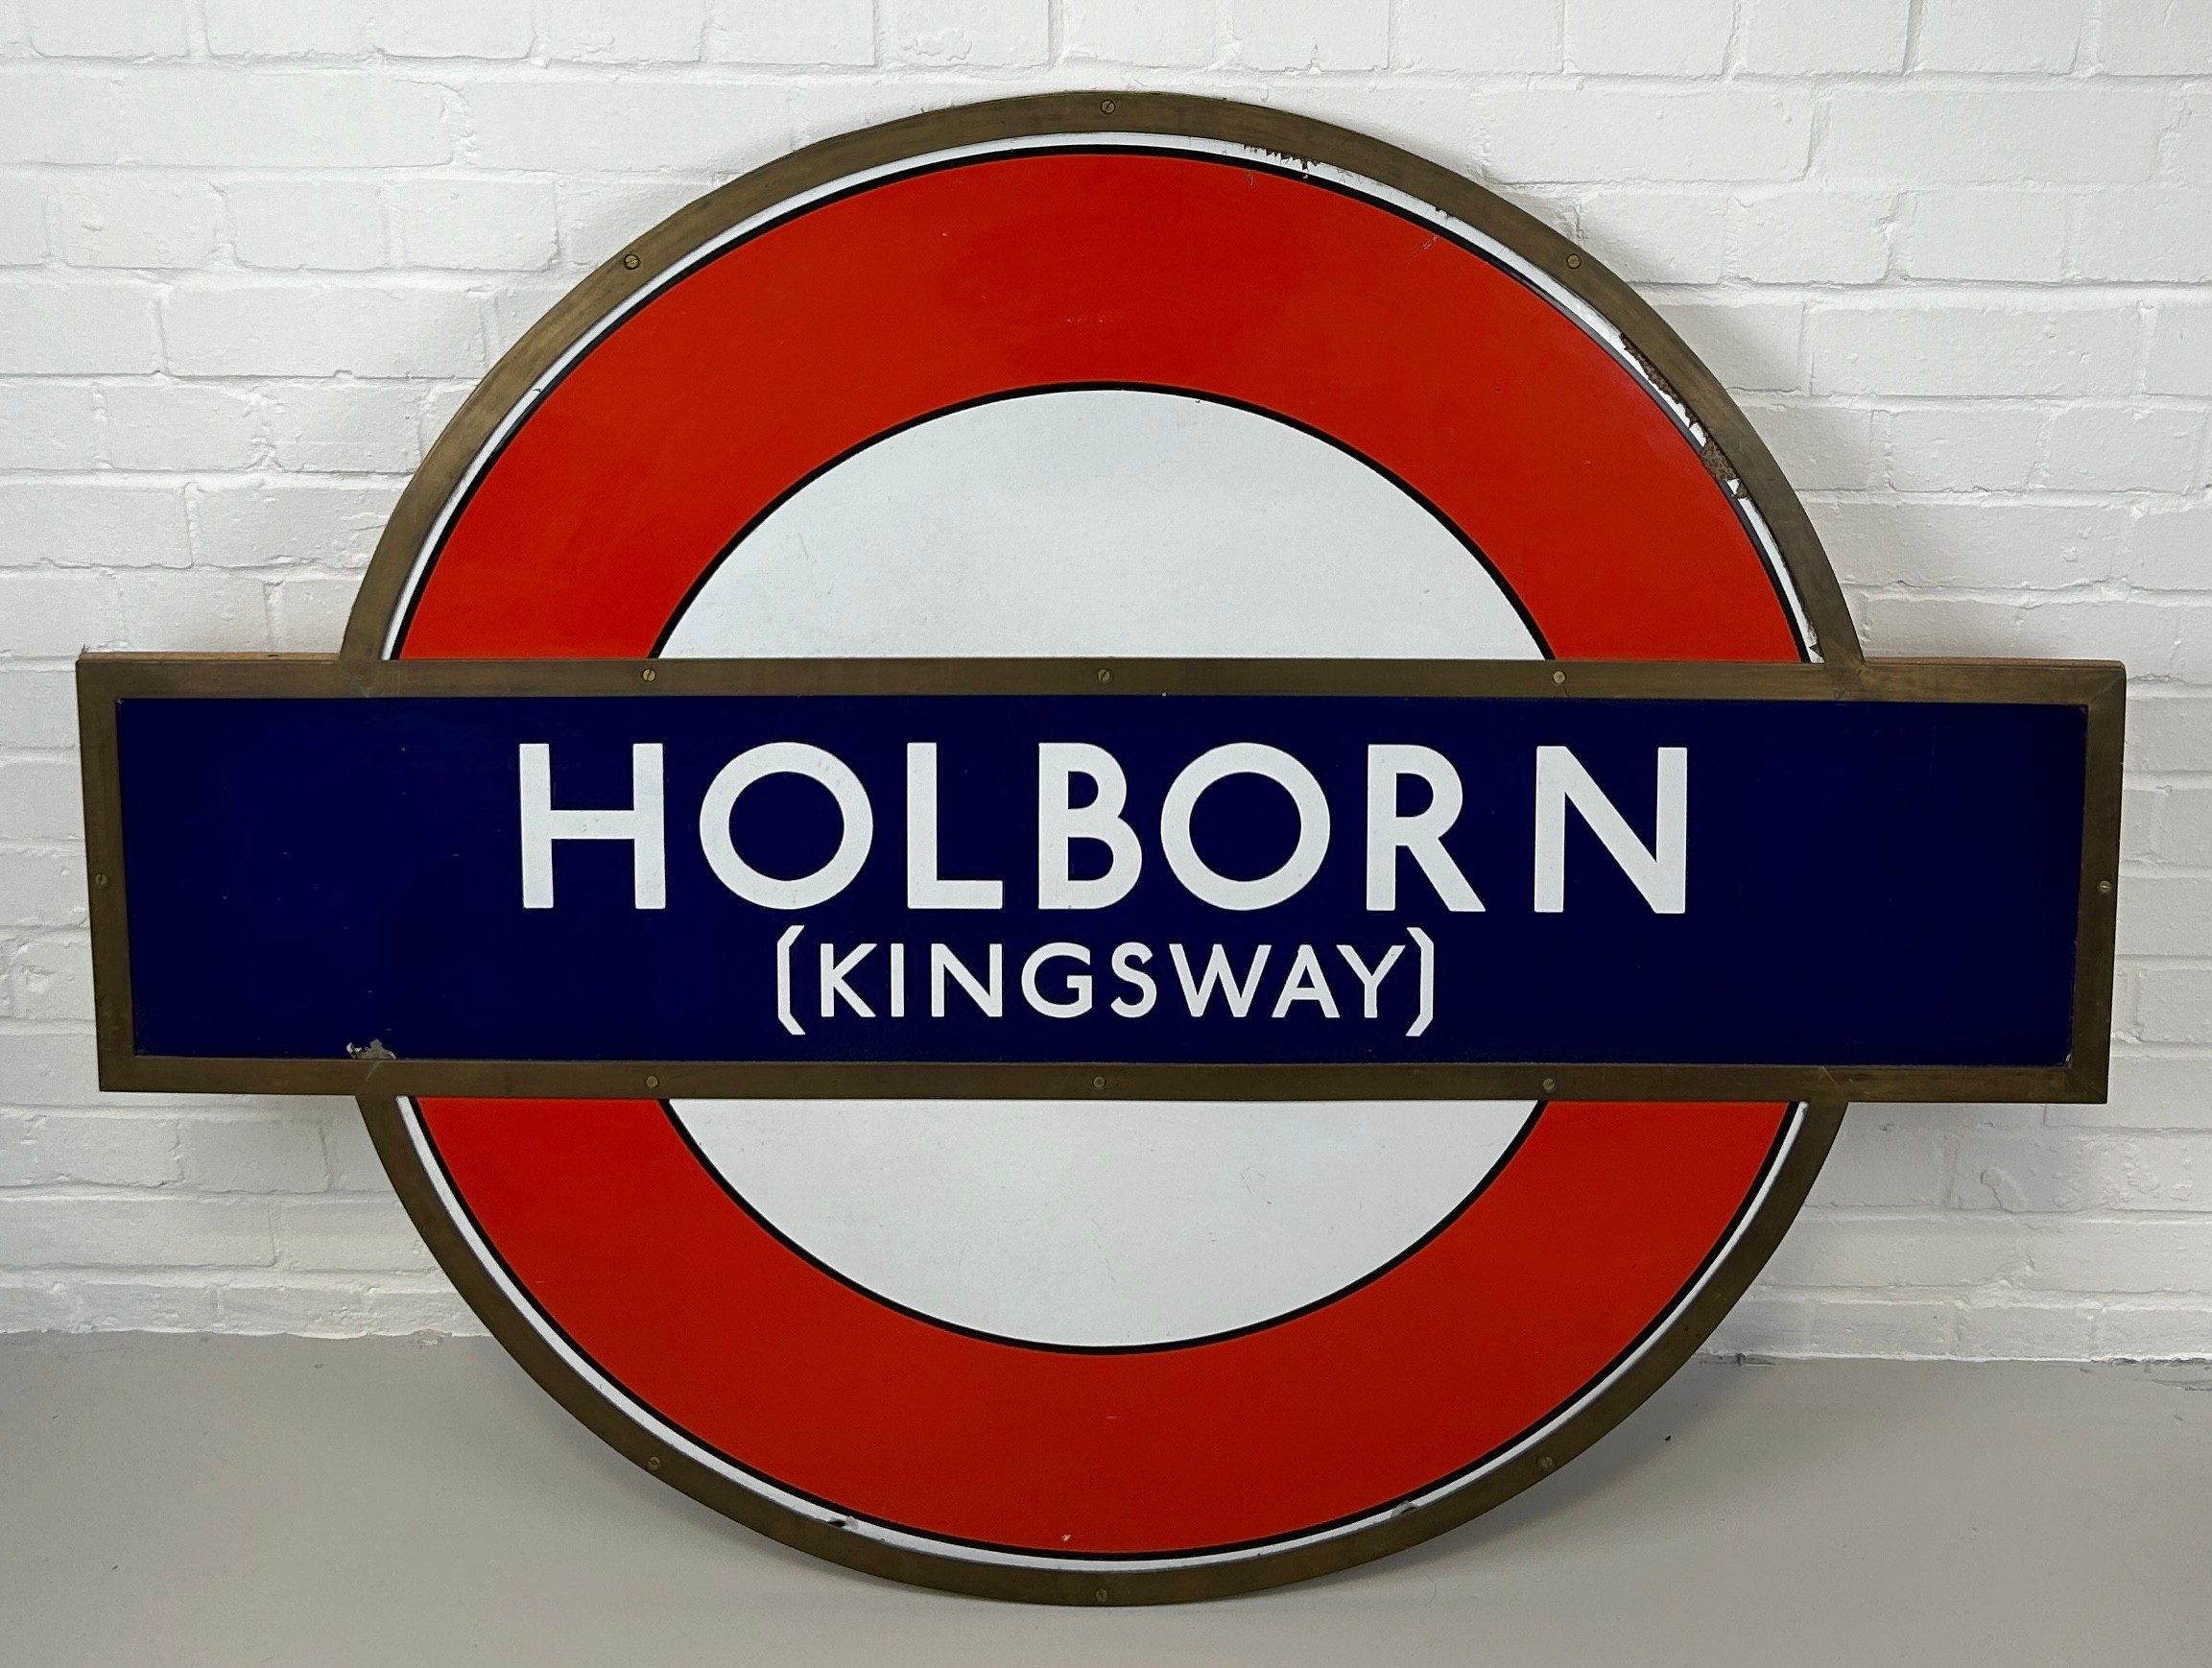 A LARGE LONDON UNDERGROUND RAILWAY SIGN FOR HOLBORN (KINGSWAY), With wooden board backing.